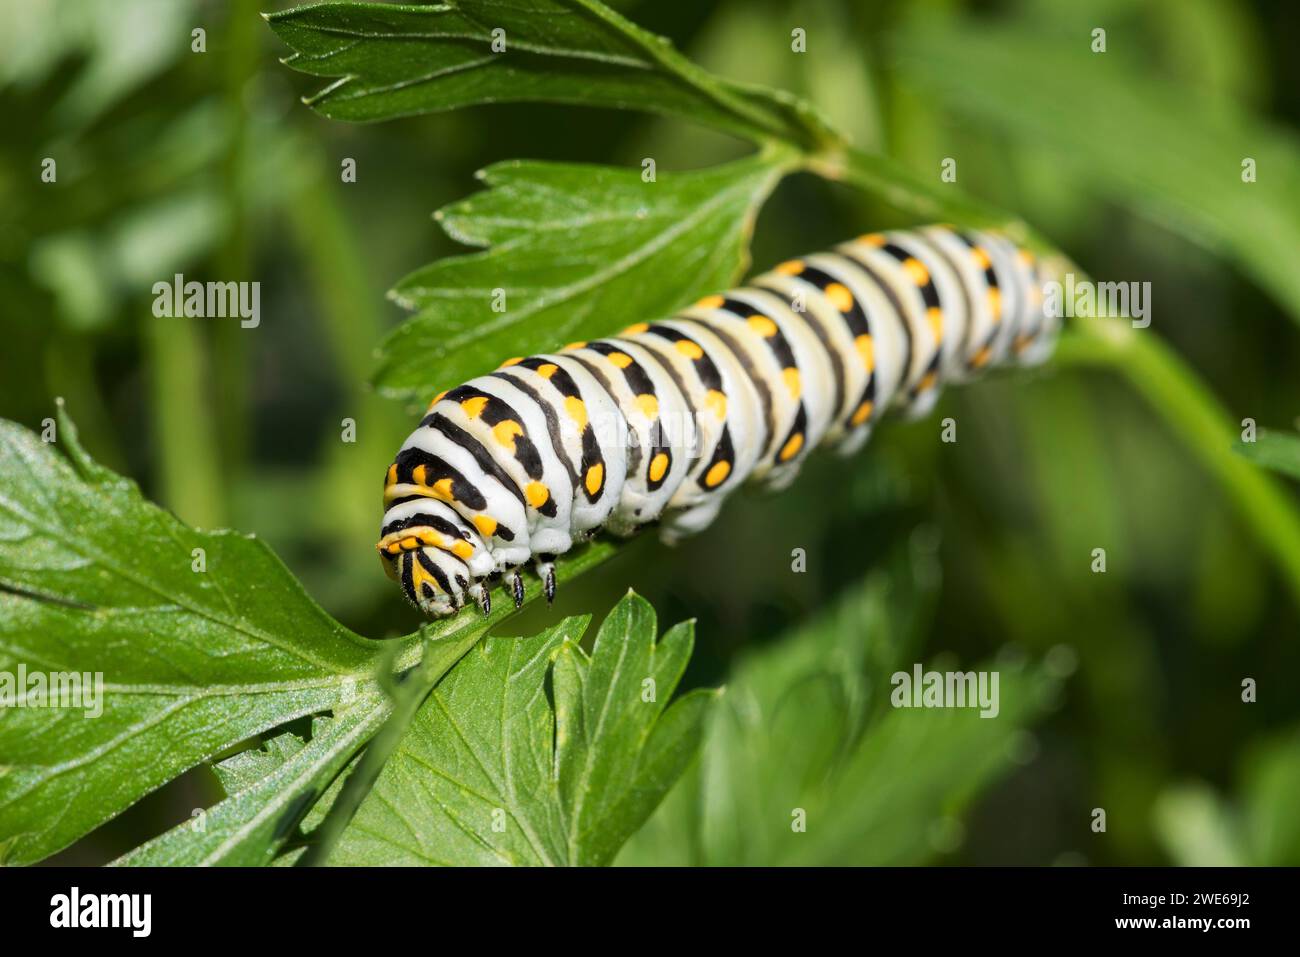 Early stage life cycle of a Swallowtail Caterpillar. A Northern Colorado backyard garden with green Parsley, provides a sheltering place and food. Stock Photo